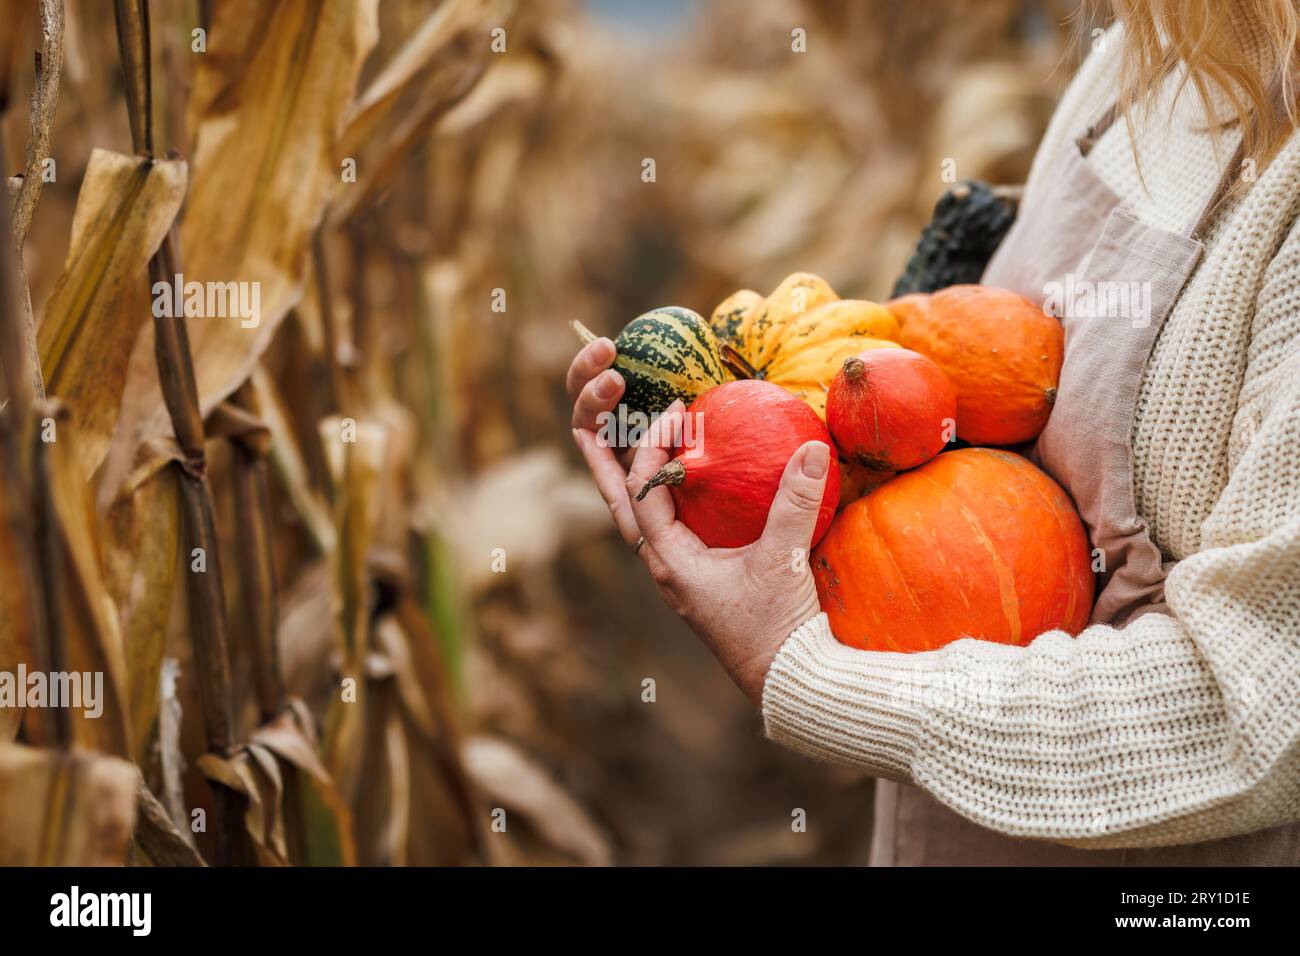 Woman holding harvested decorative pumpkins in corn field. Autumn harvesting Stock Photo